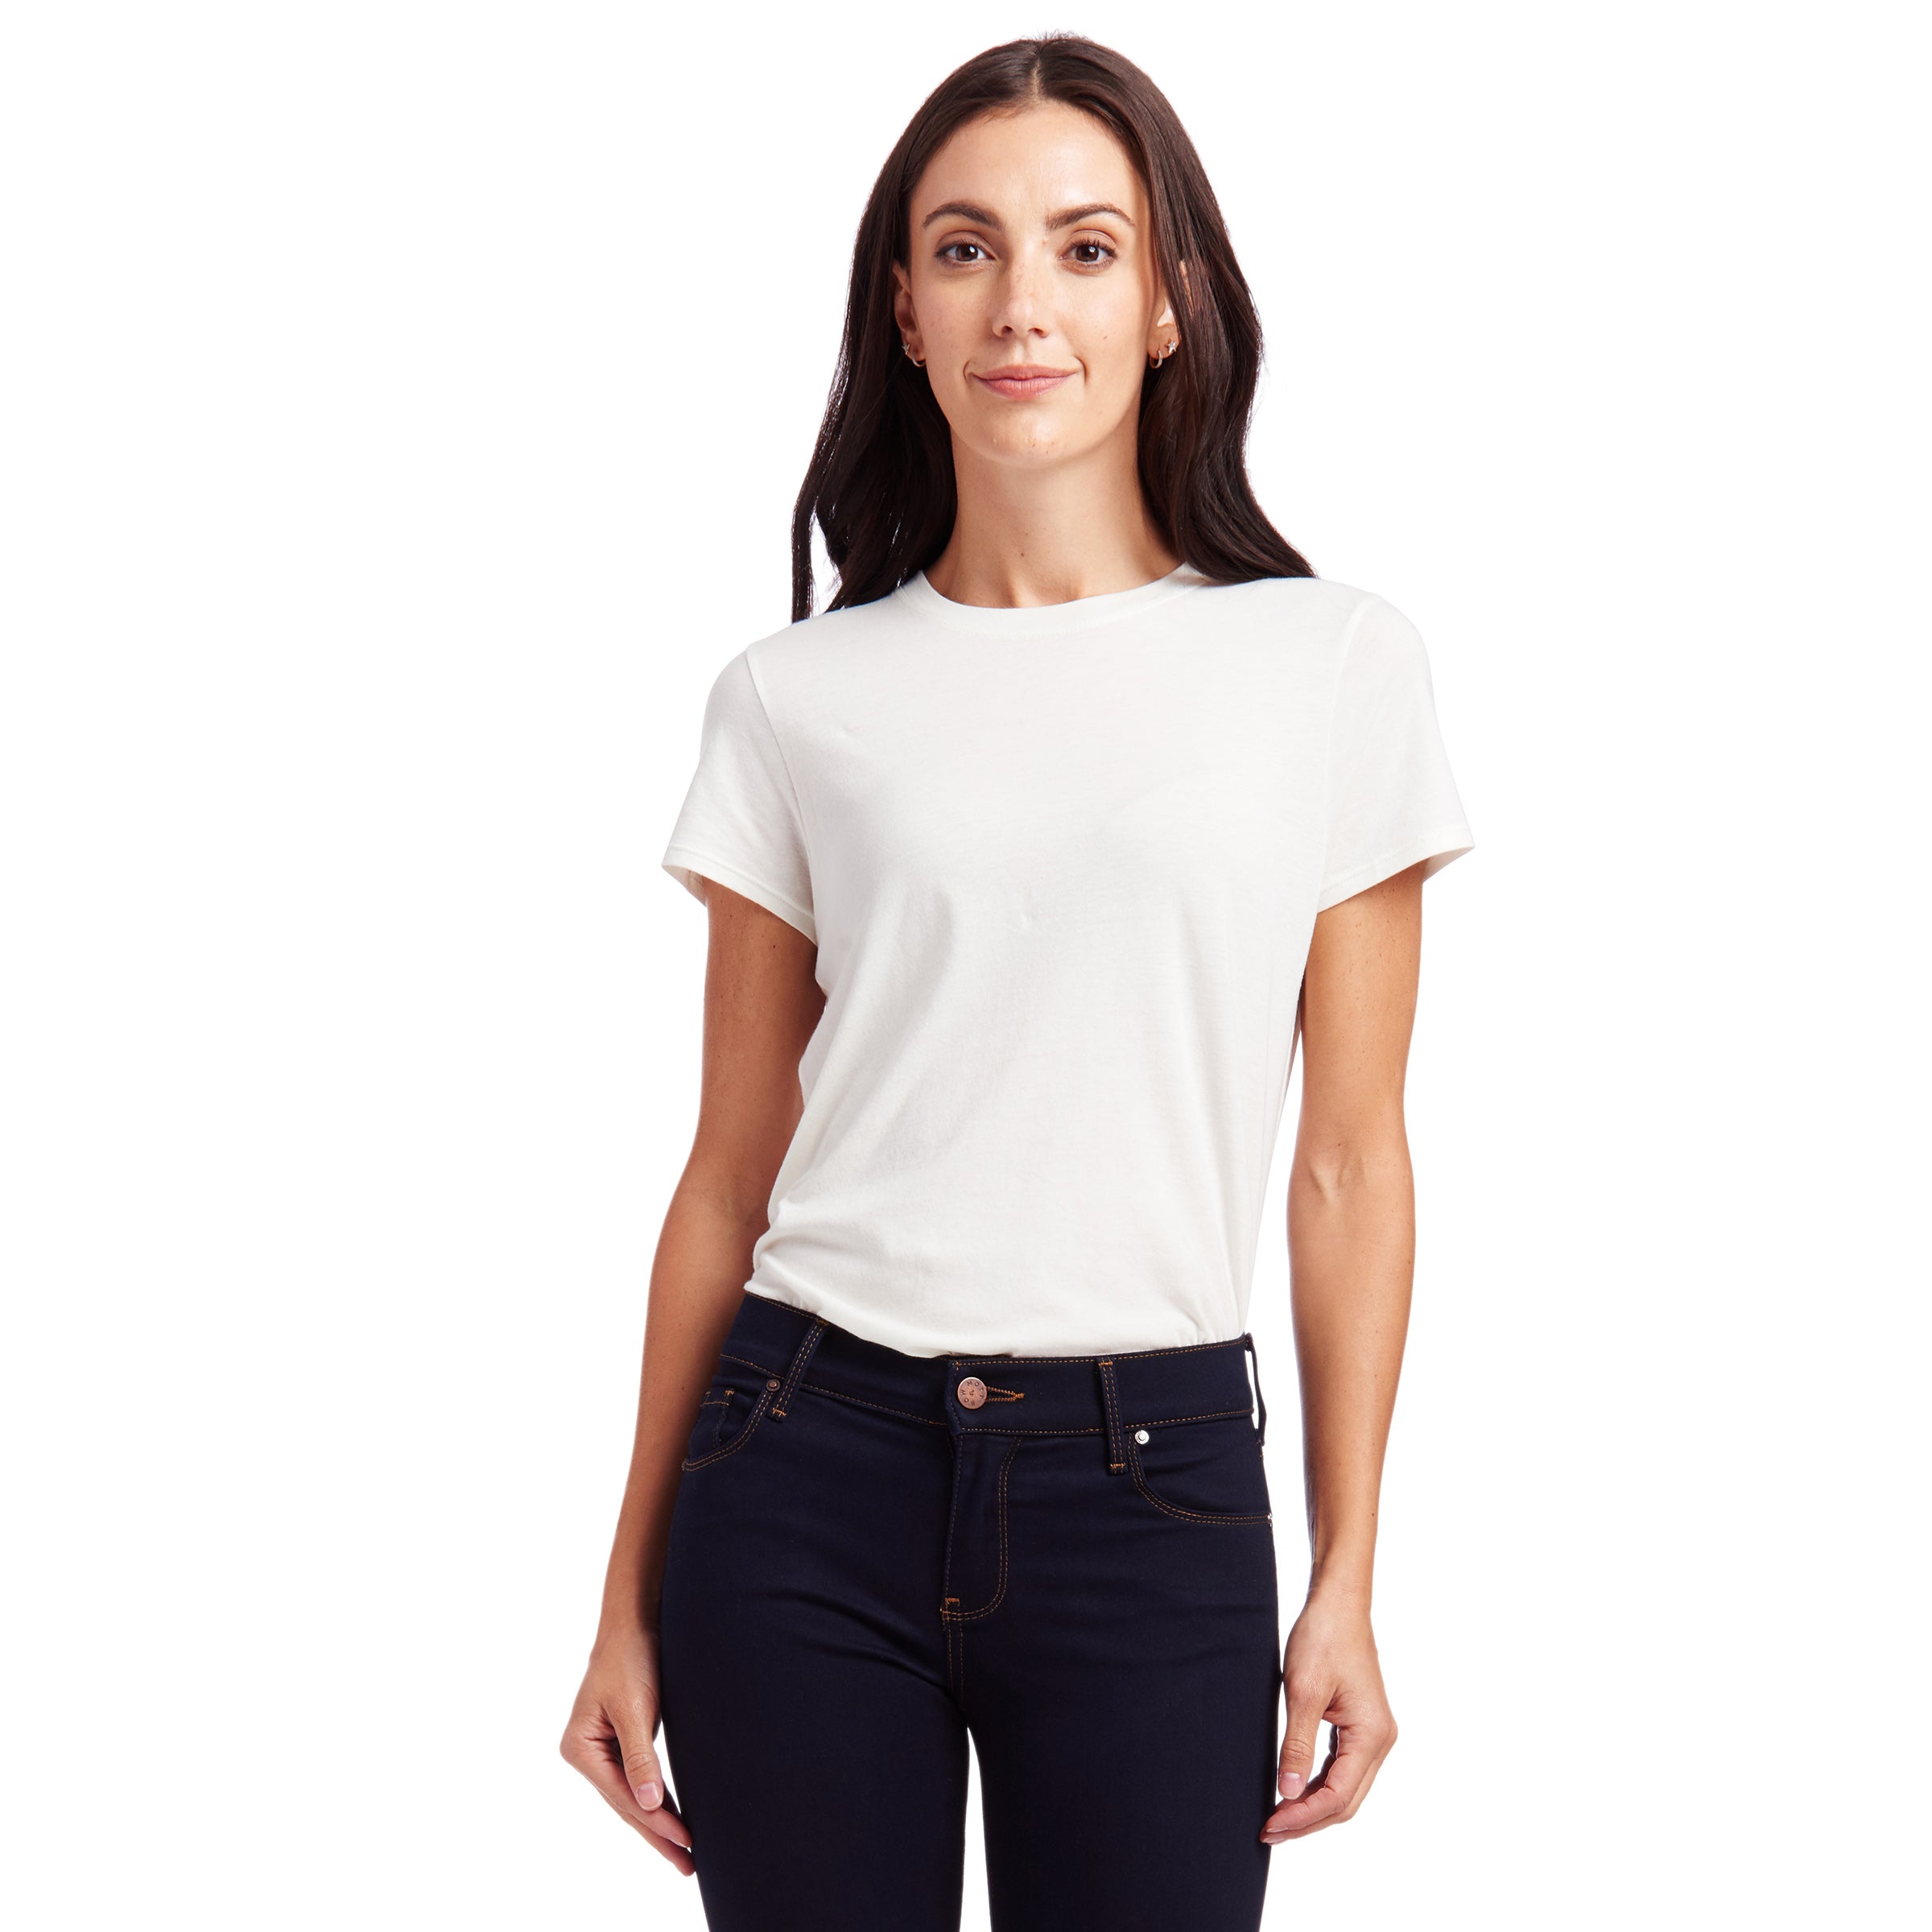 Women wearing Blanc vintage Fitted Crew Marcy Tee